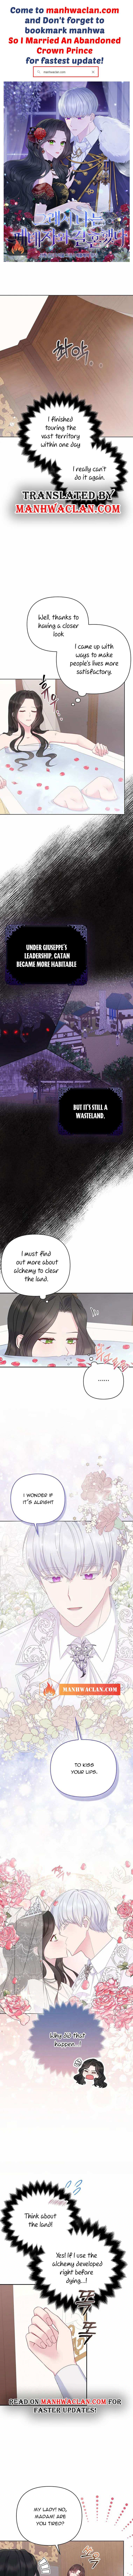 So I Married An Abandoned Crown Prince - Page 1